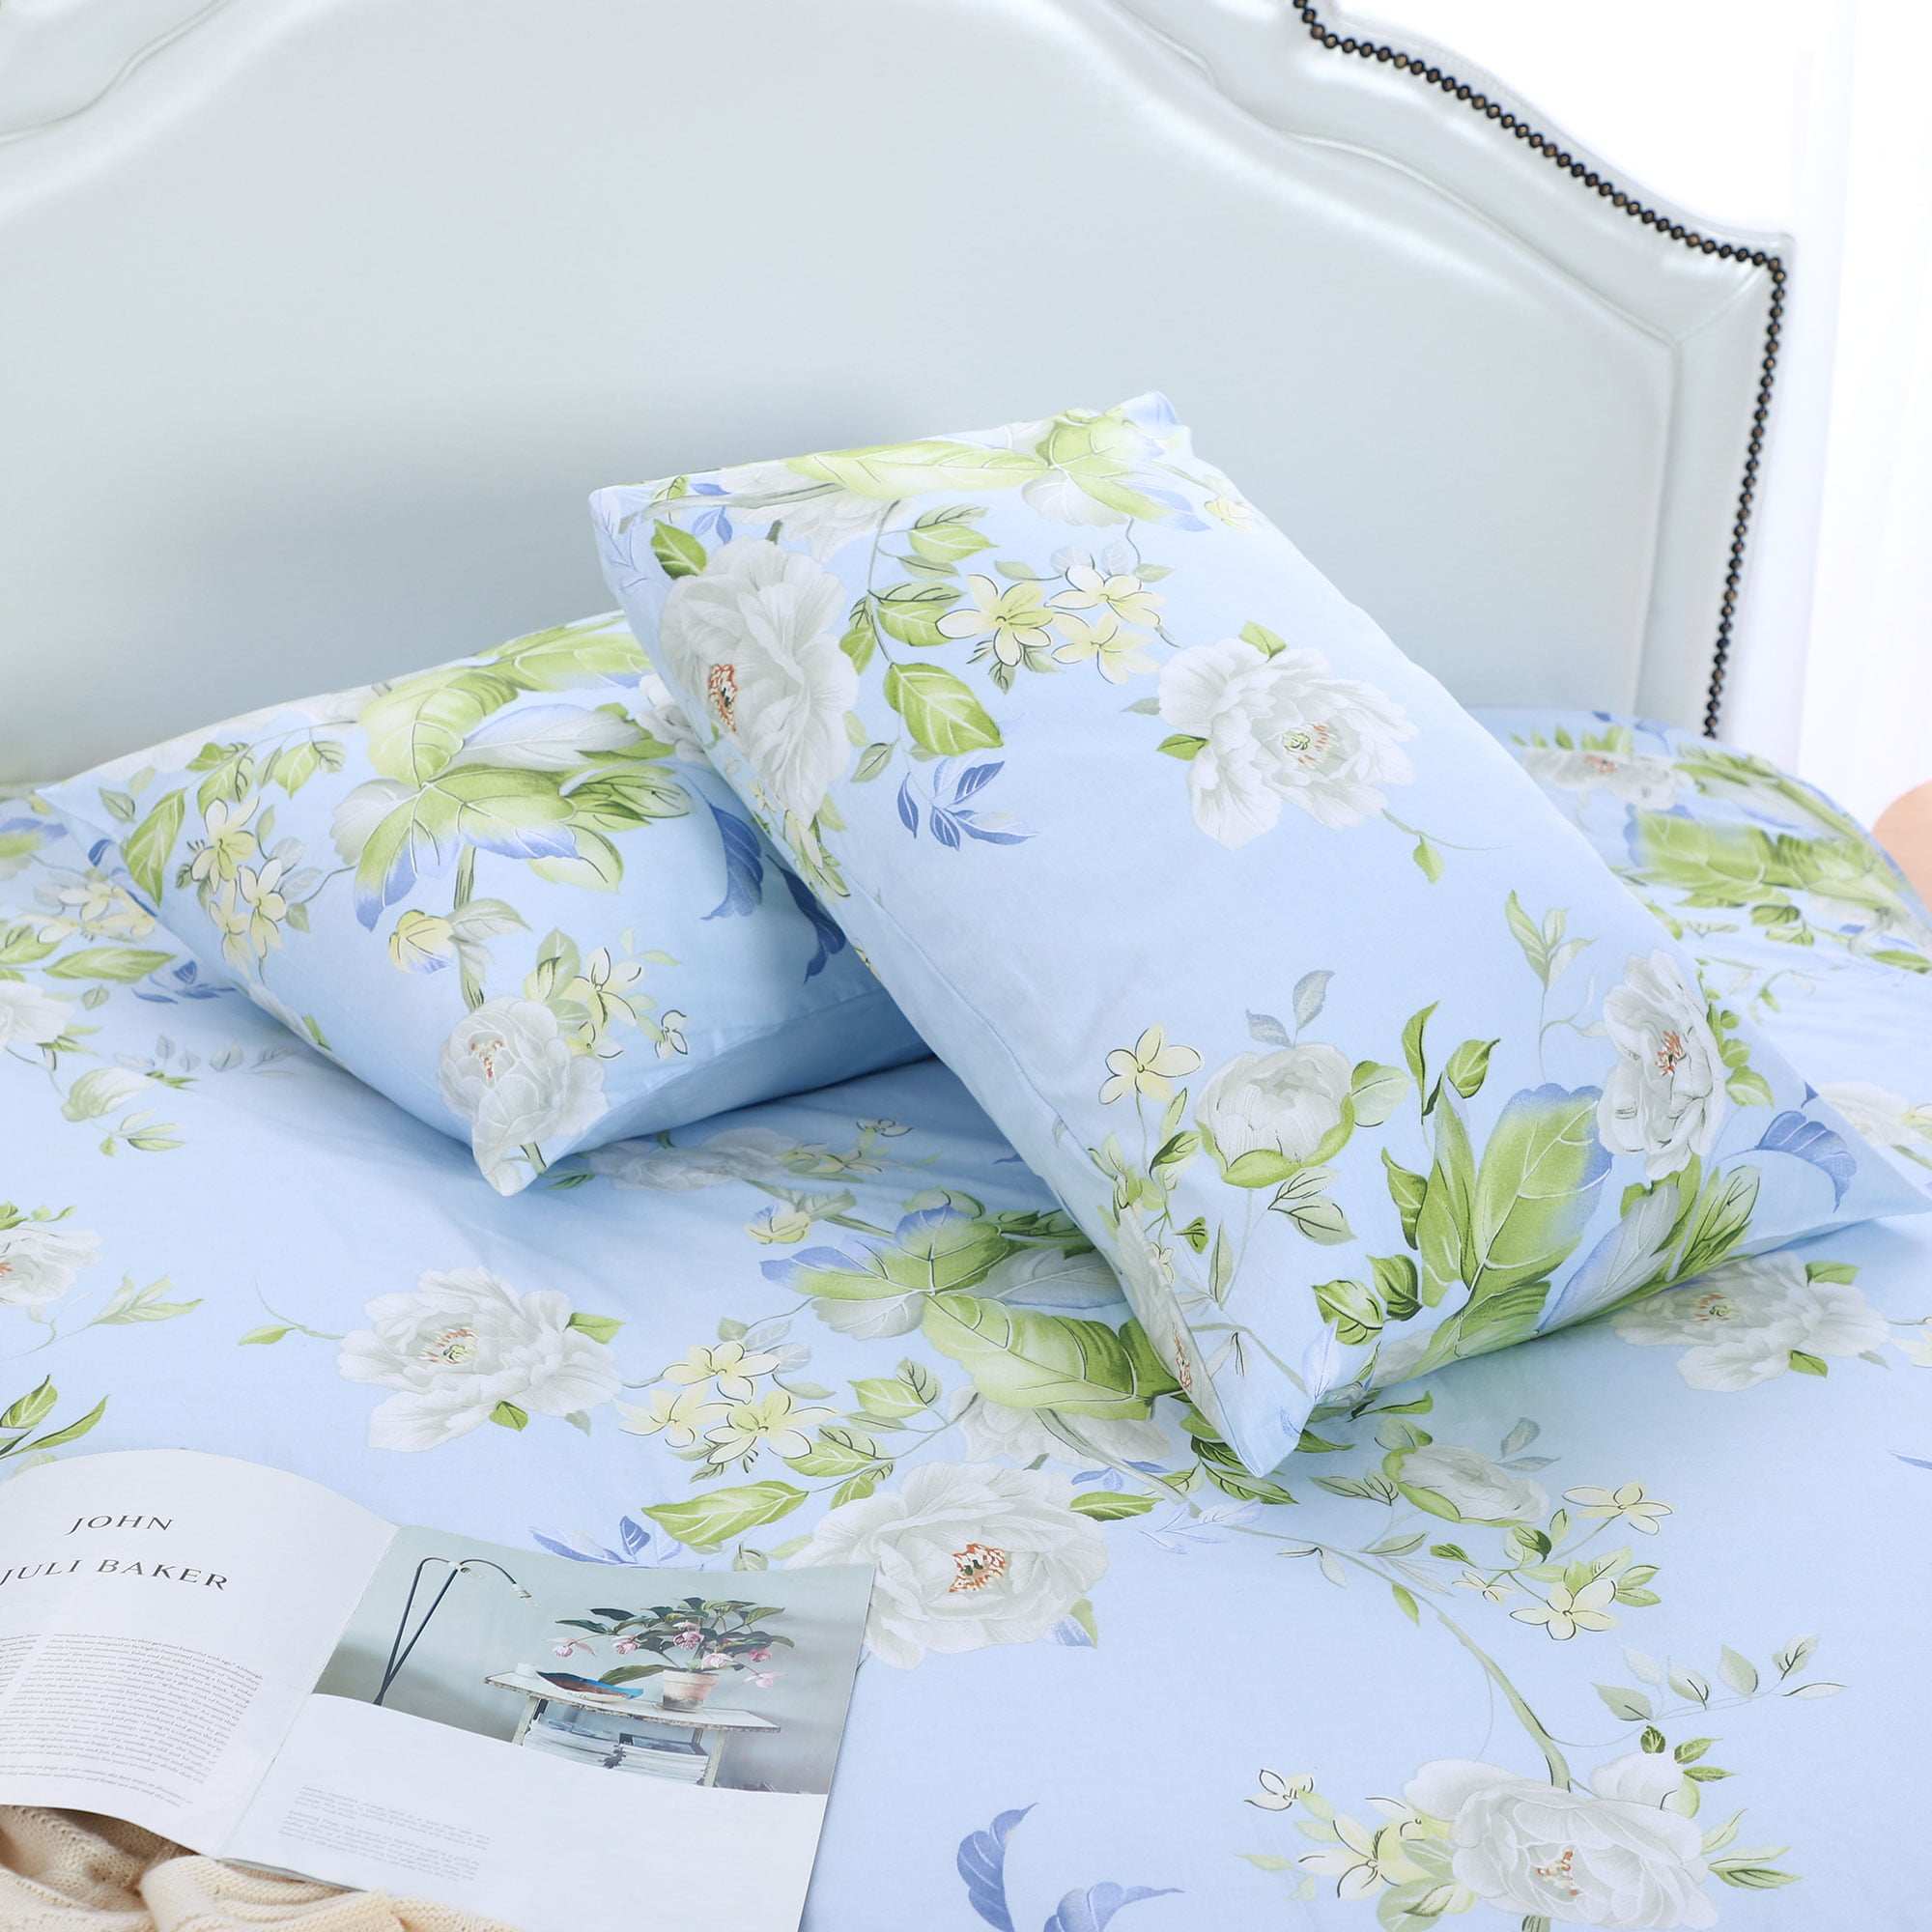 Floral Embroidered Quilted Throw Bedspread Comforter Bedding Set /& Pillow Cases Sky Blue, Double